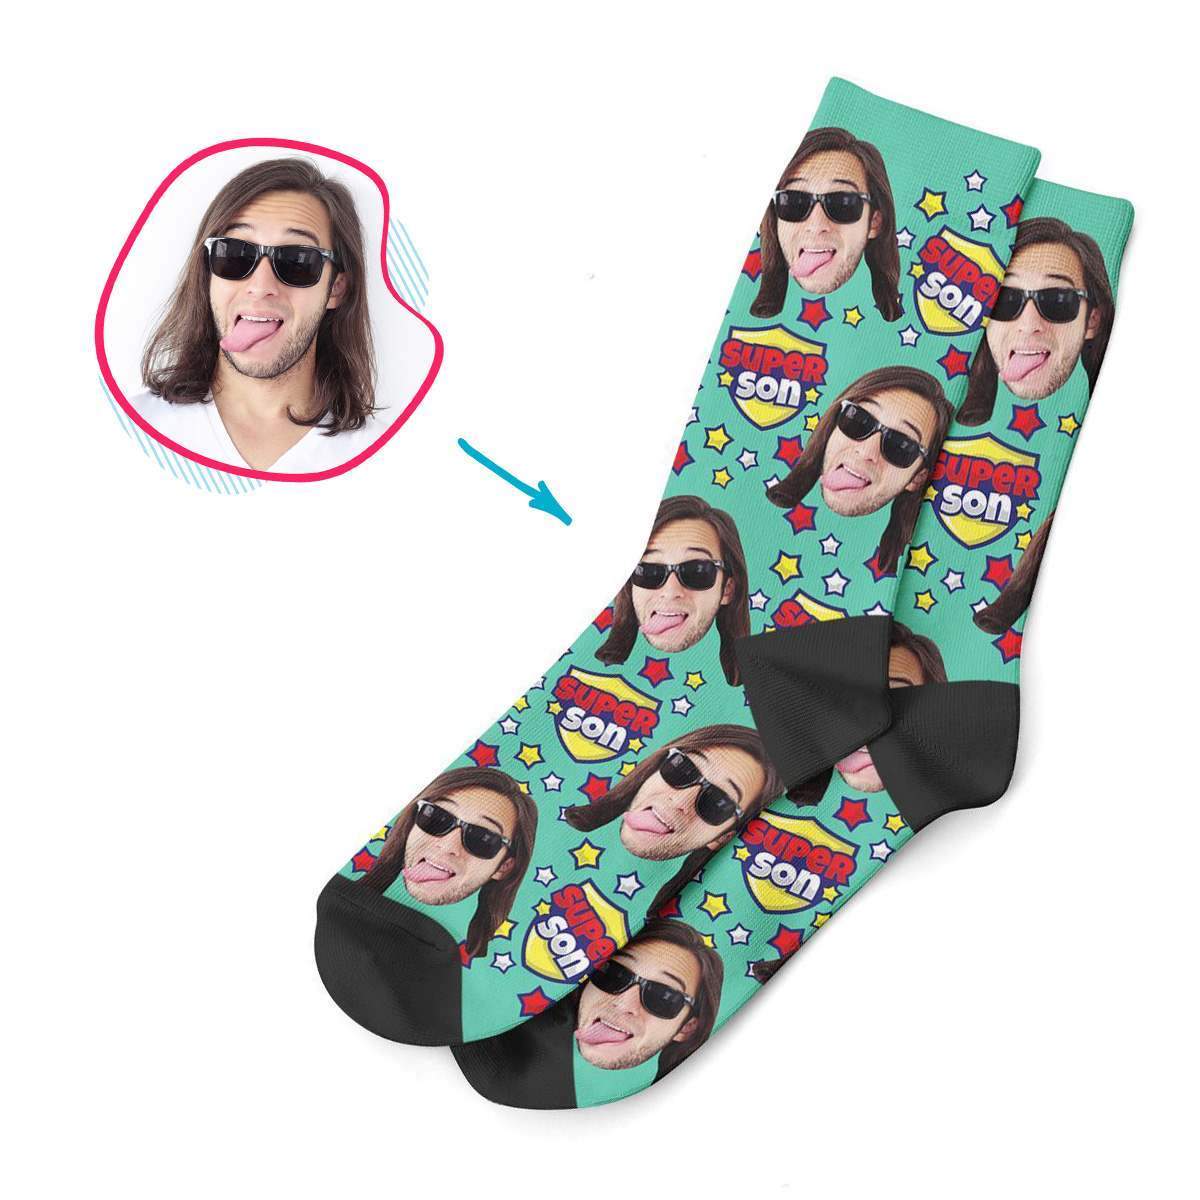 mint Super Son socks personalized with photo of face printed on them